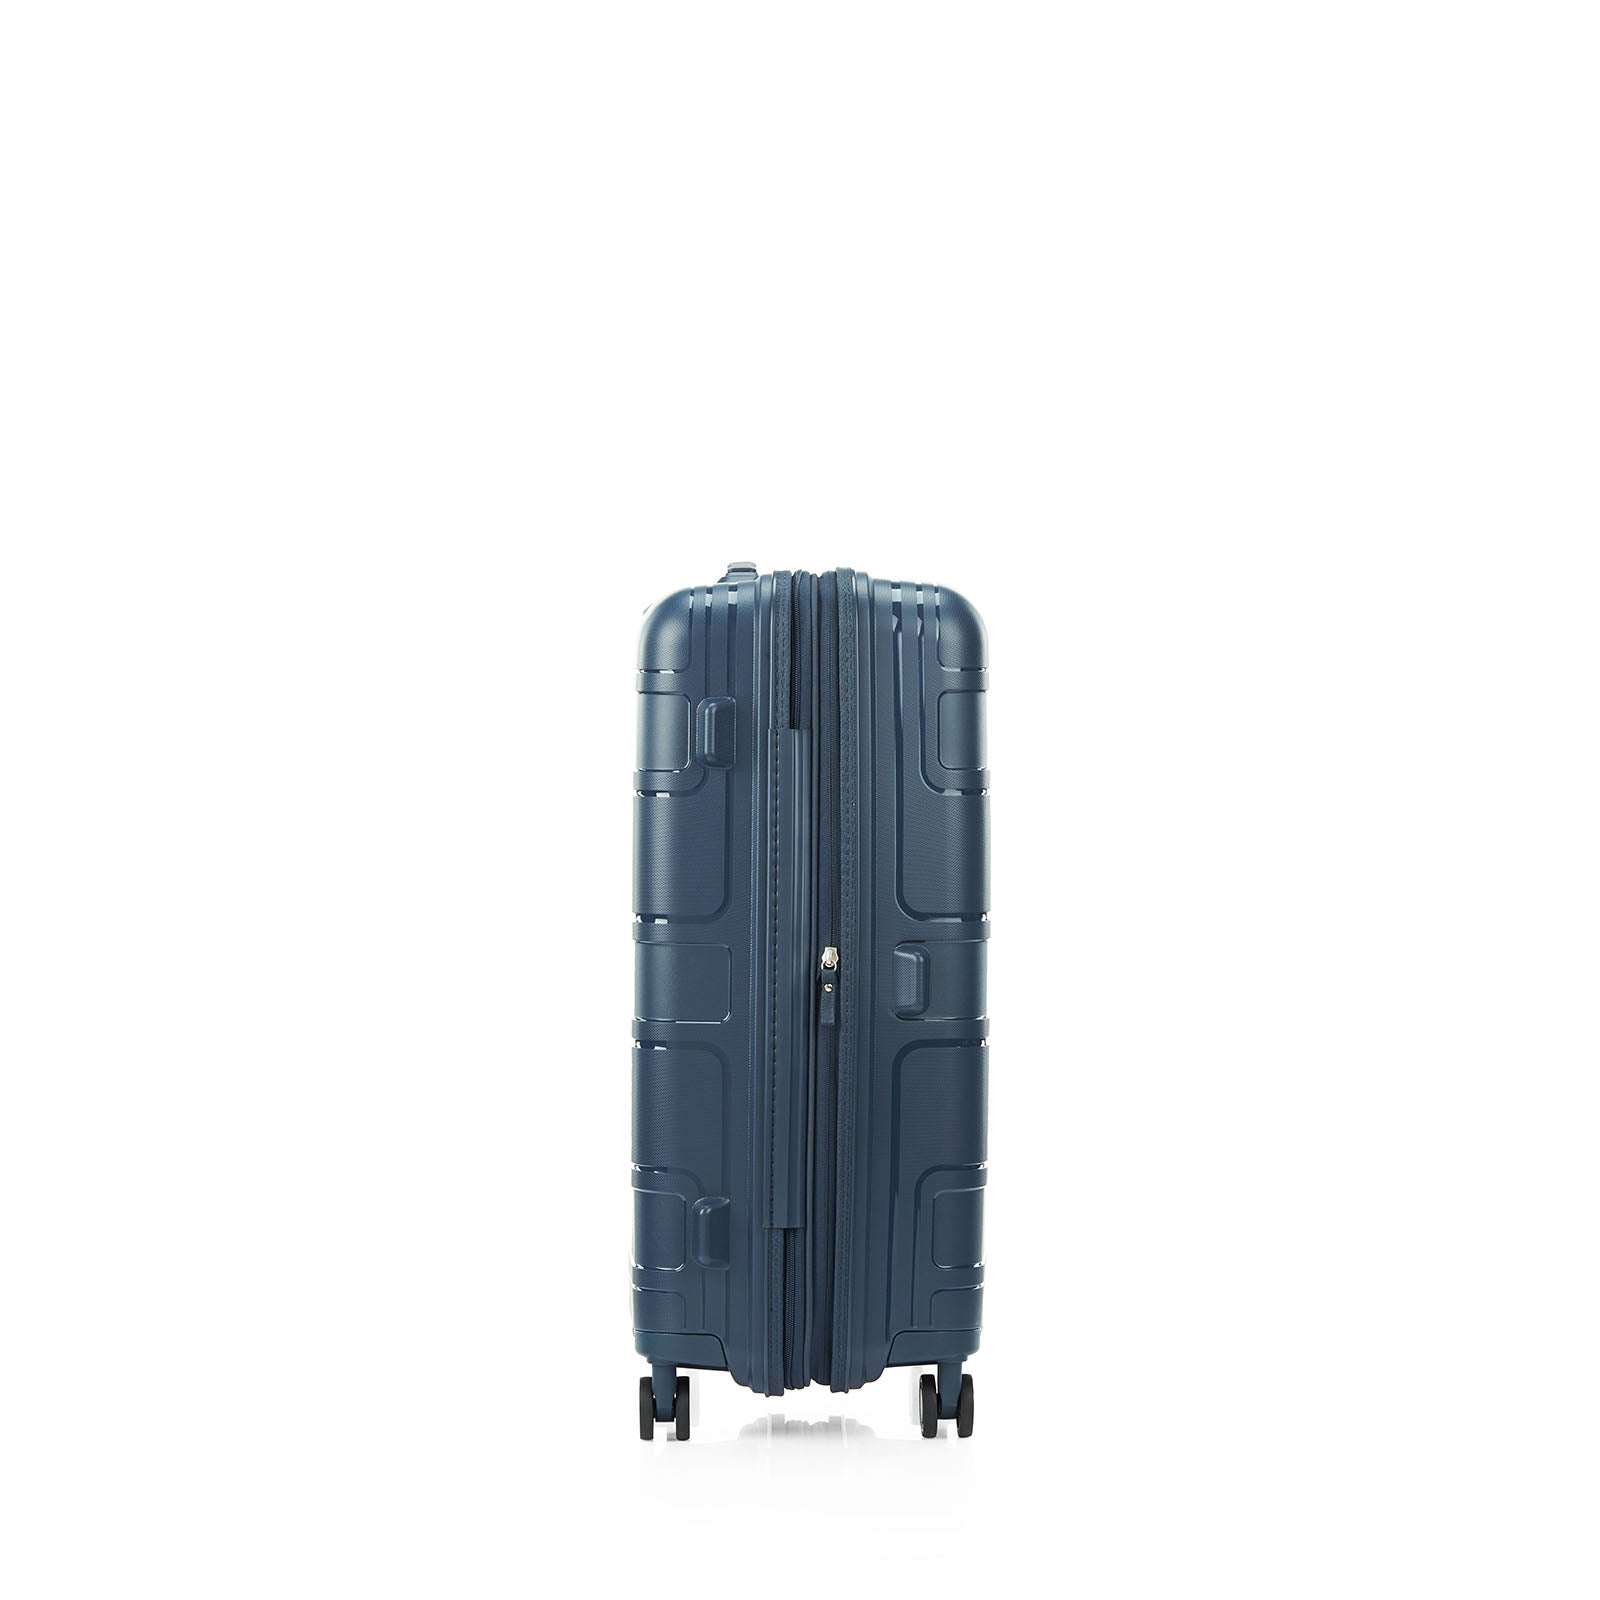 American-Tourister-Light-Max-69cm-Suitcase-Navy-Side